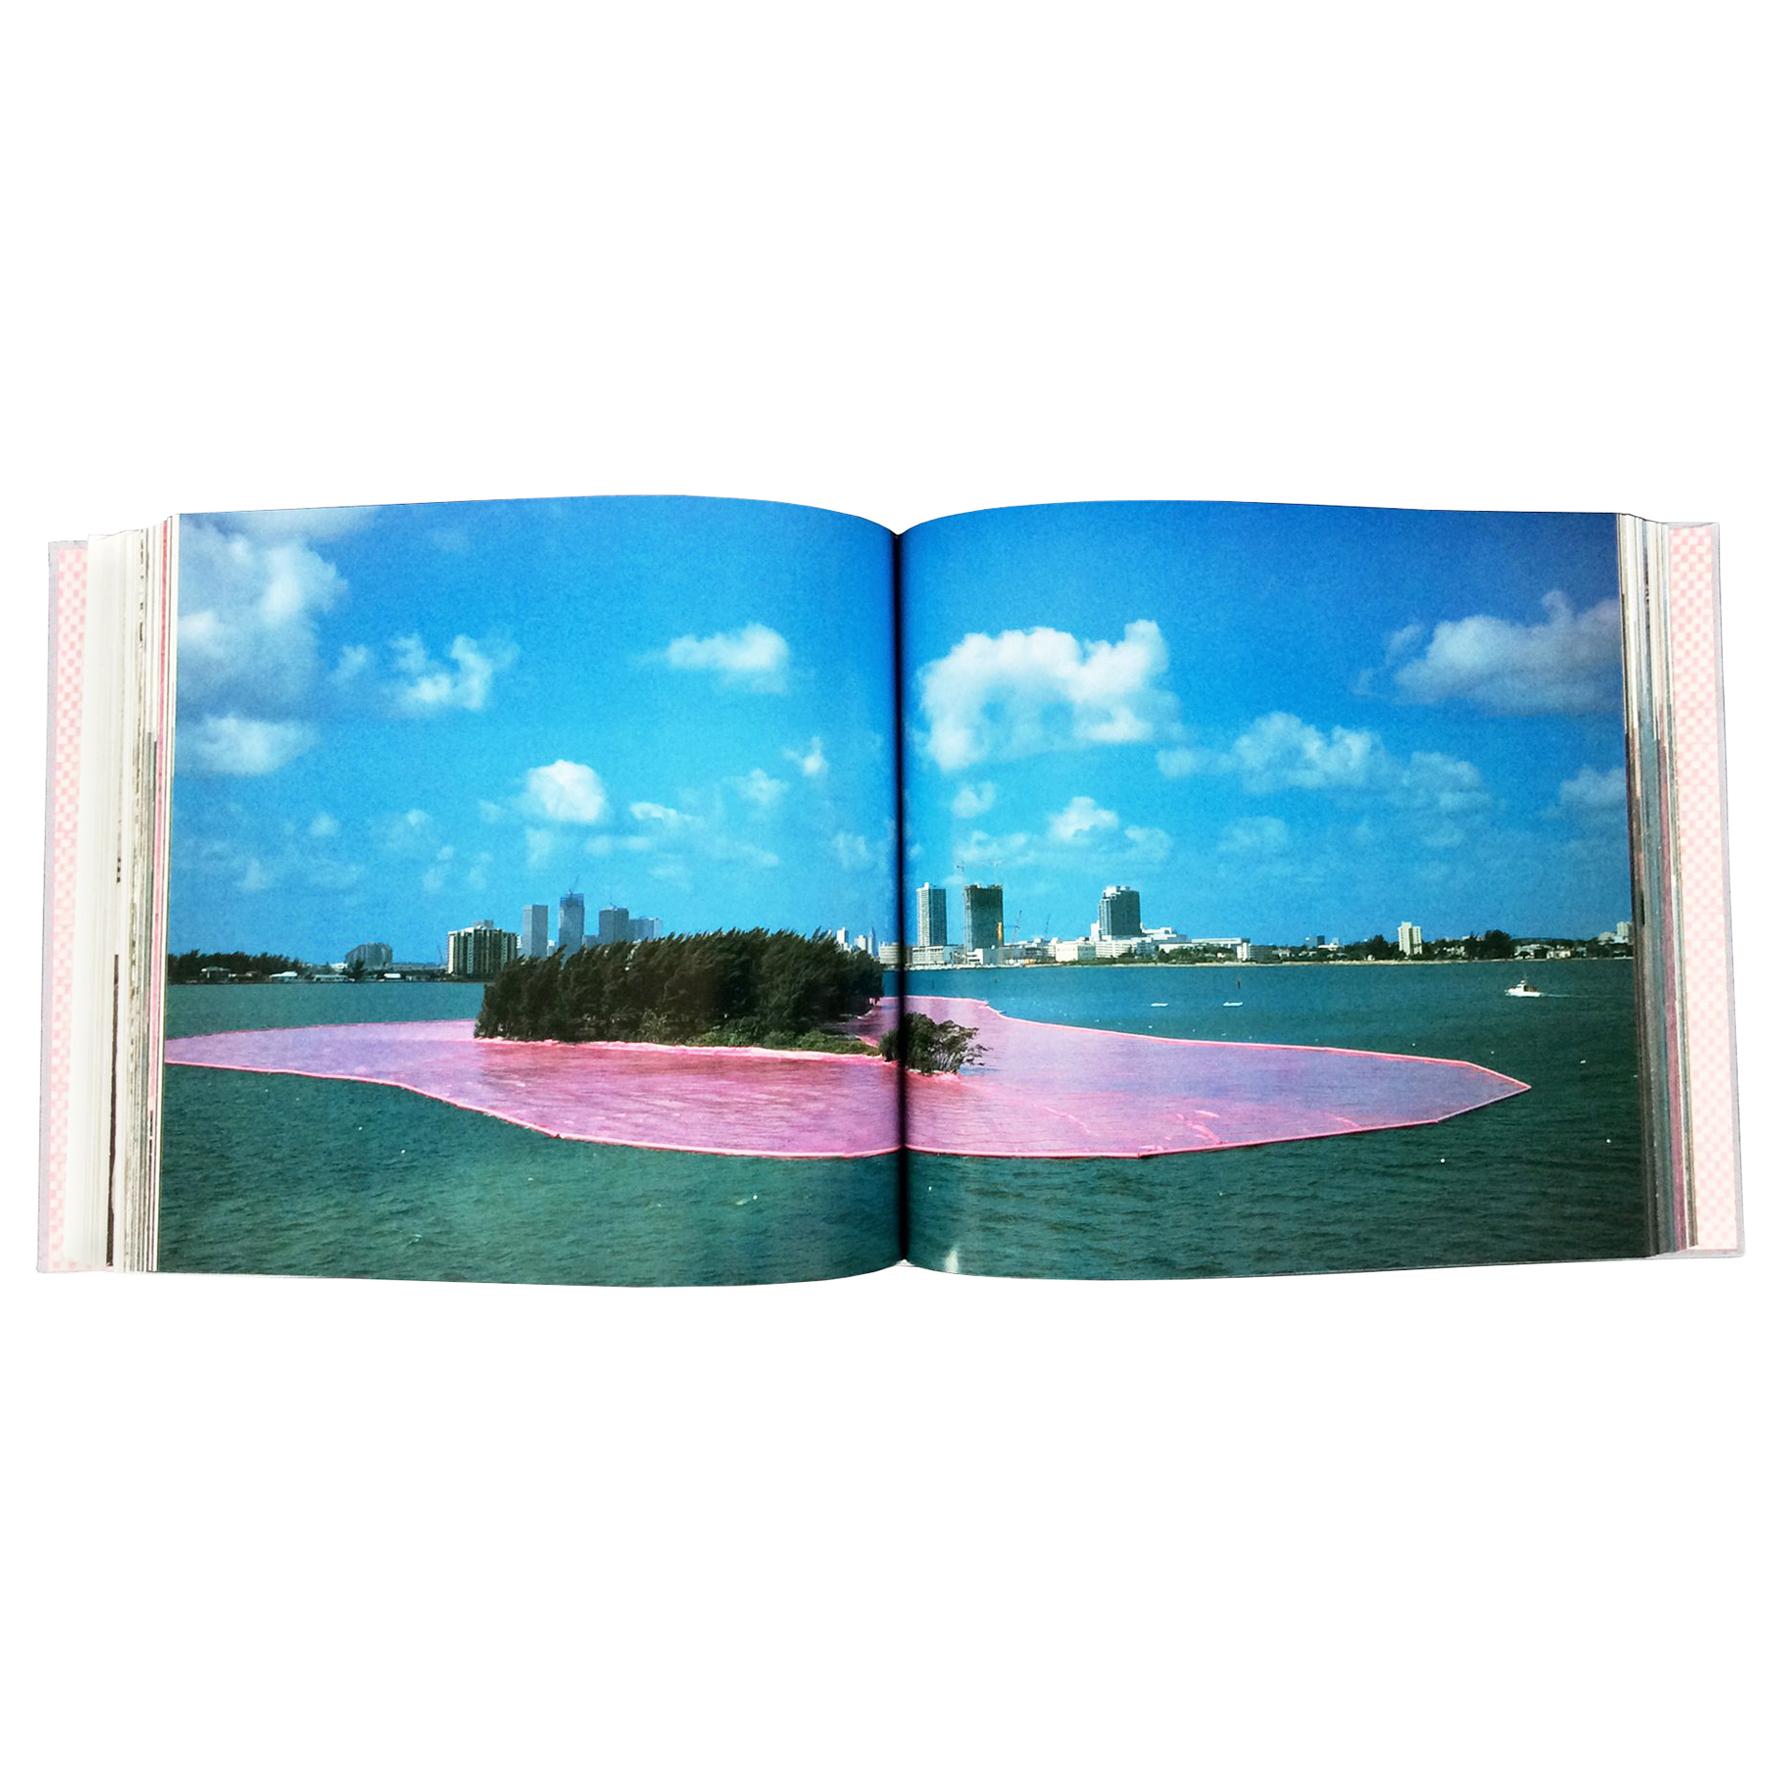 Christo & Jeanne-Claude Monograph "Surrounded Islands"